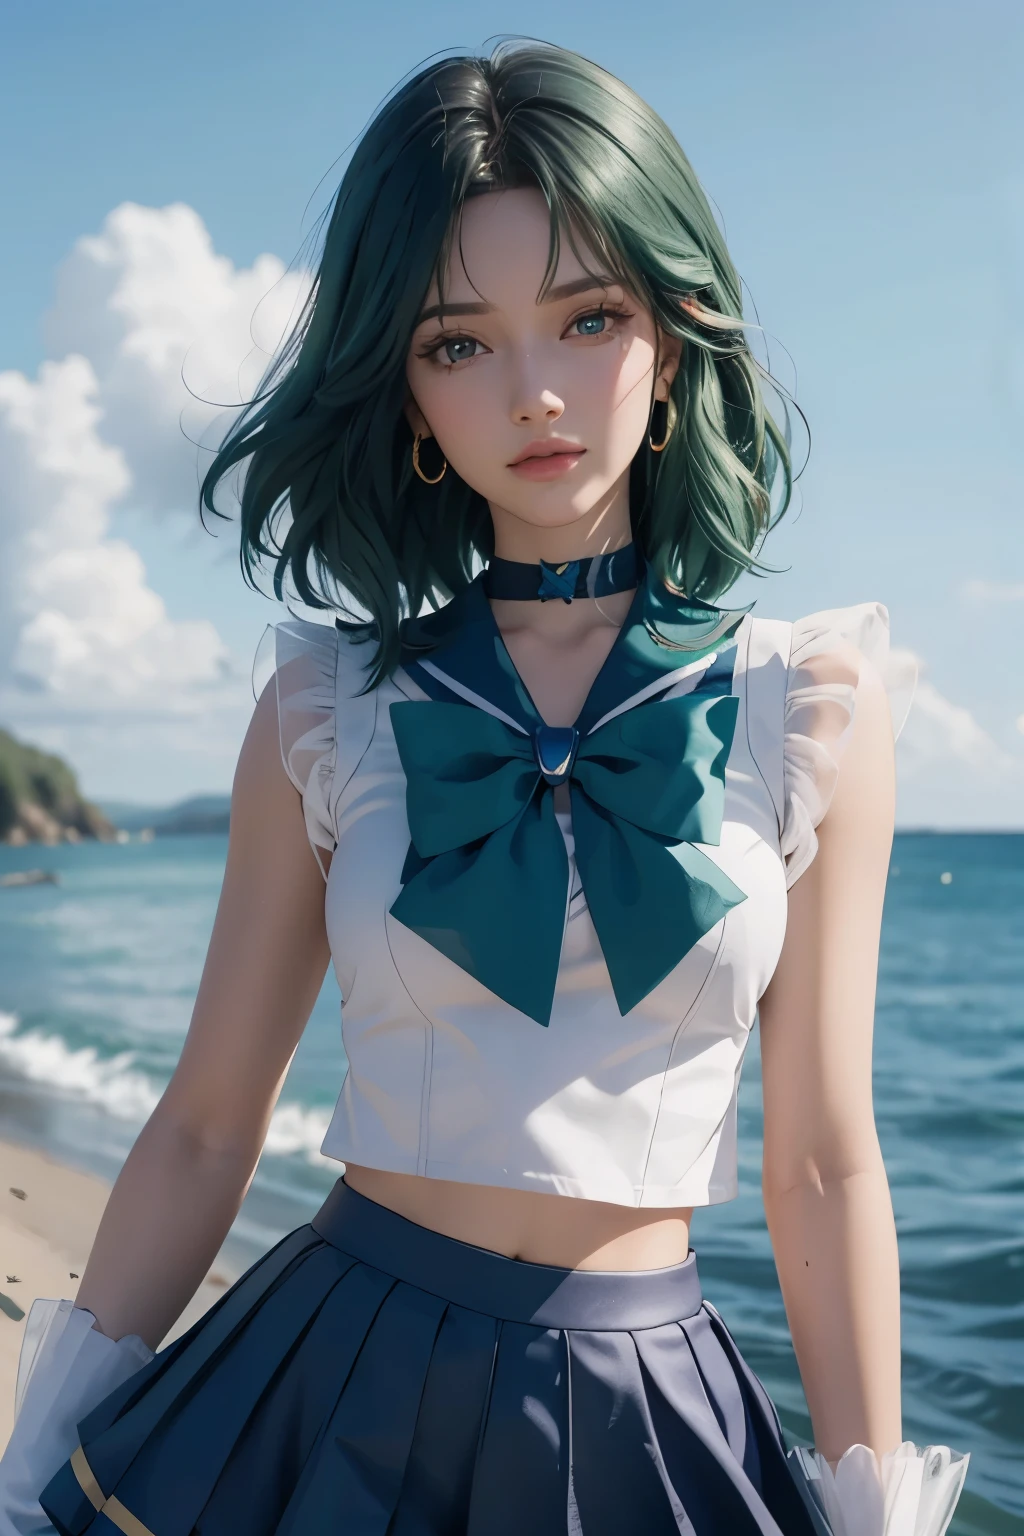 close up， 1 girl， sailor neptune， （sailor senshi：1.2）， （aqua eyes：0.9）， dark green hair， medium hair， Wedge skirt， best quality， earrings， masterpiece， high resolution， intricate details， （Reality）， photography， （white elbow gloves：1.1）， jewelry， medium breasts， whole body， dynamic background， dynamic poses 